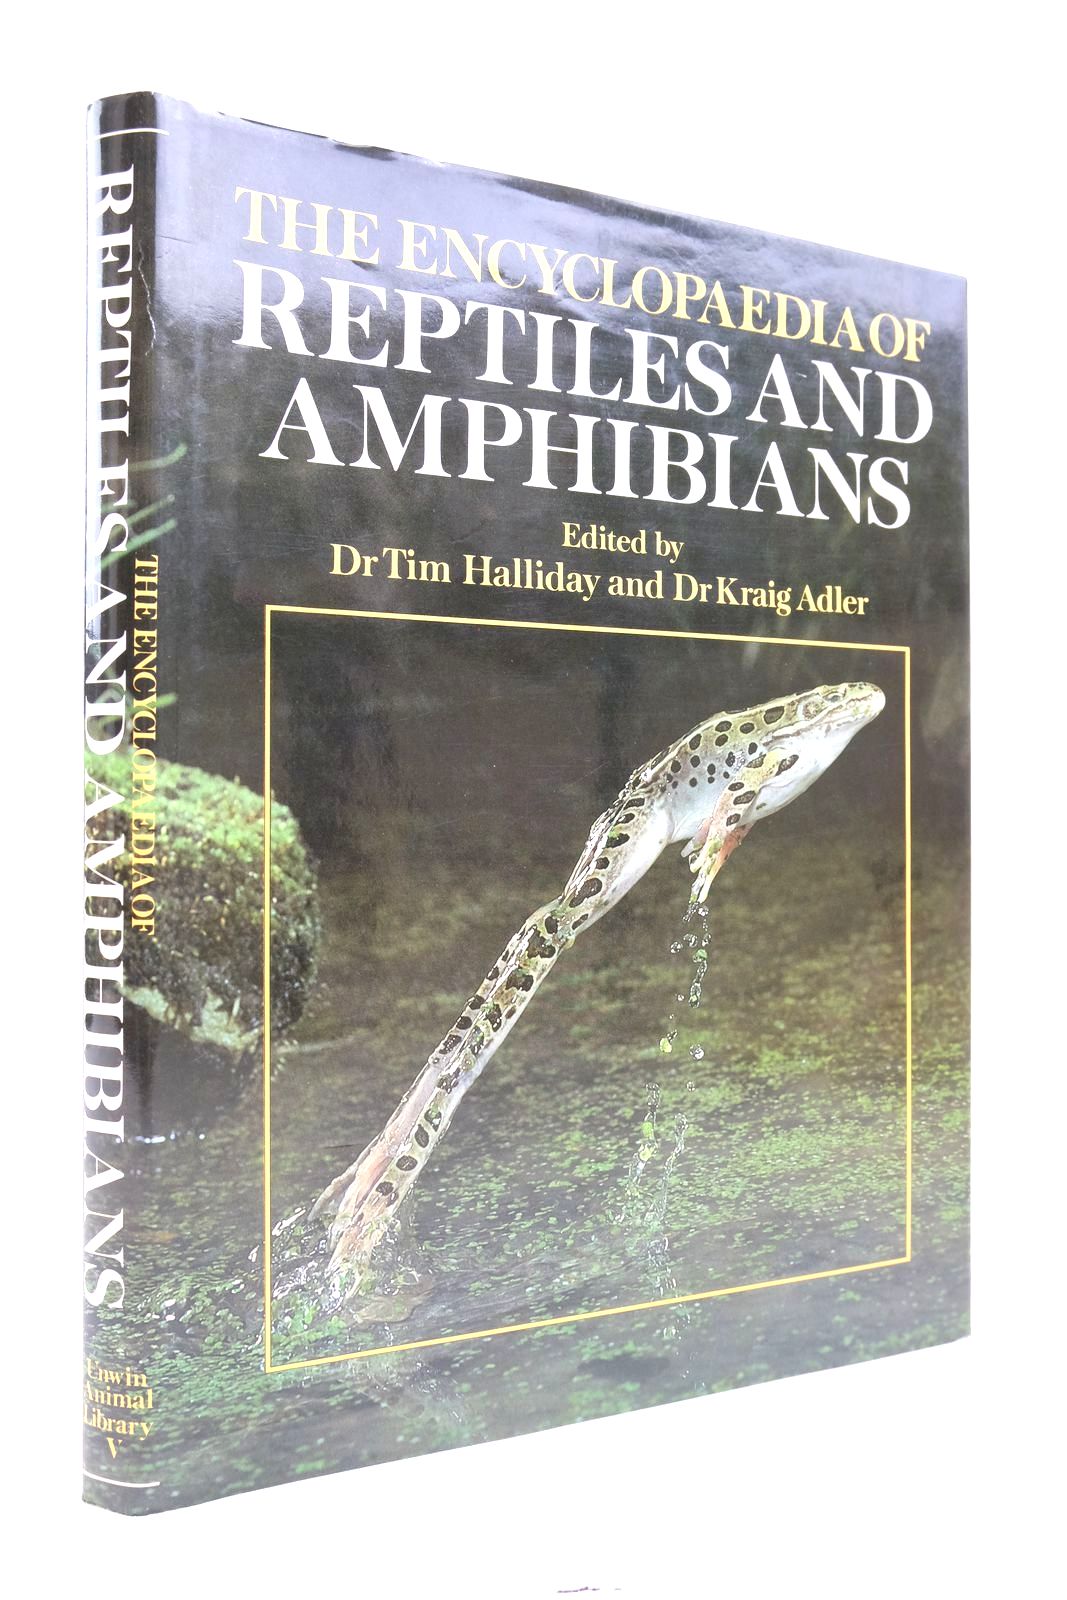 Photo of THE ENCYCLOPAEDIA OF REPTILES AND AMPHIBIANS written by Halliday, Tim R. Alder, Kraig published by George Allen &amp; Unwin (STOCK CODE: 2139189)  for sale by Stella & Rose's Books